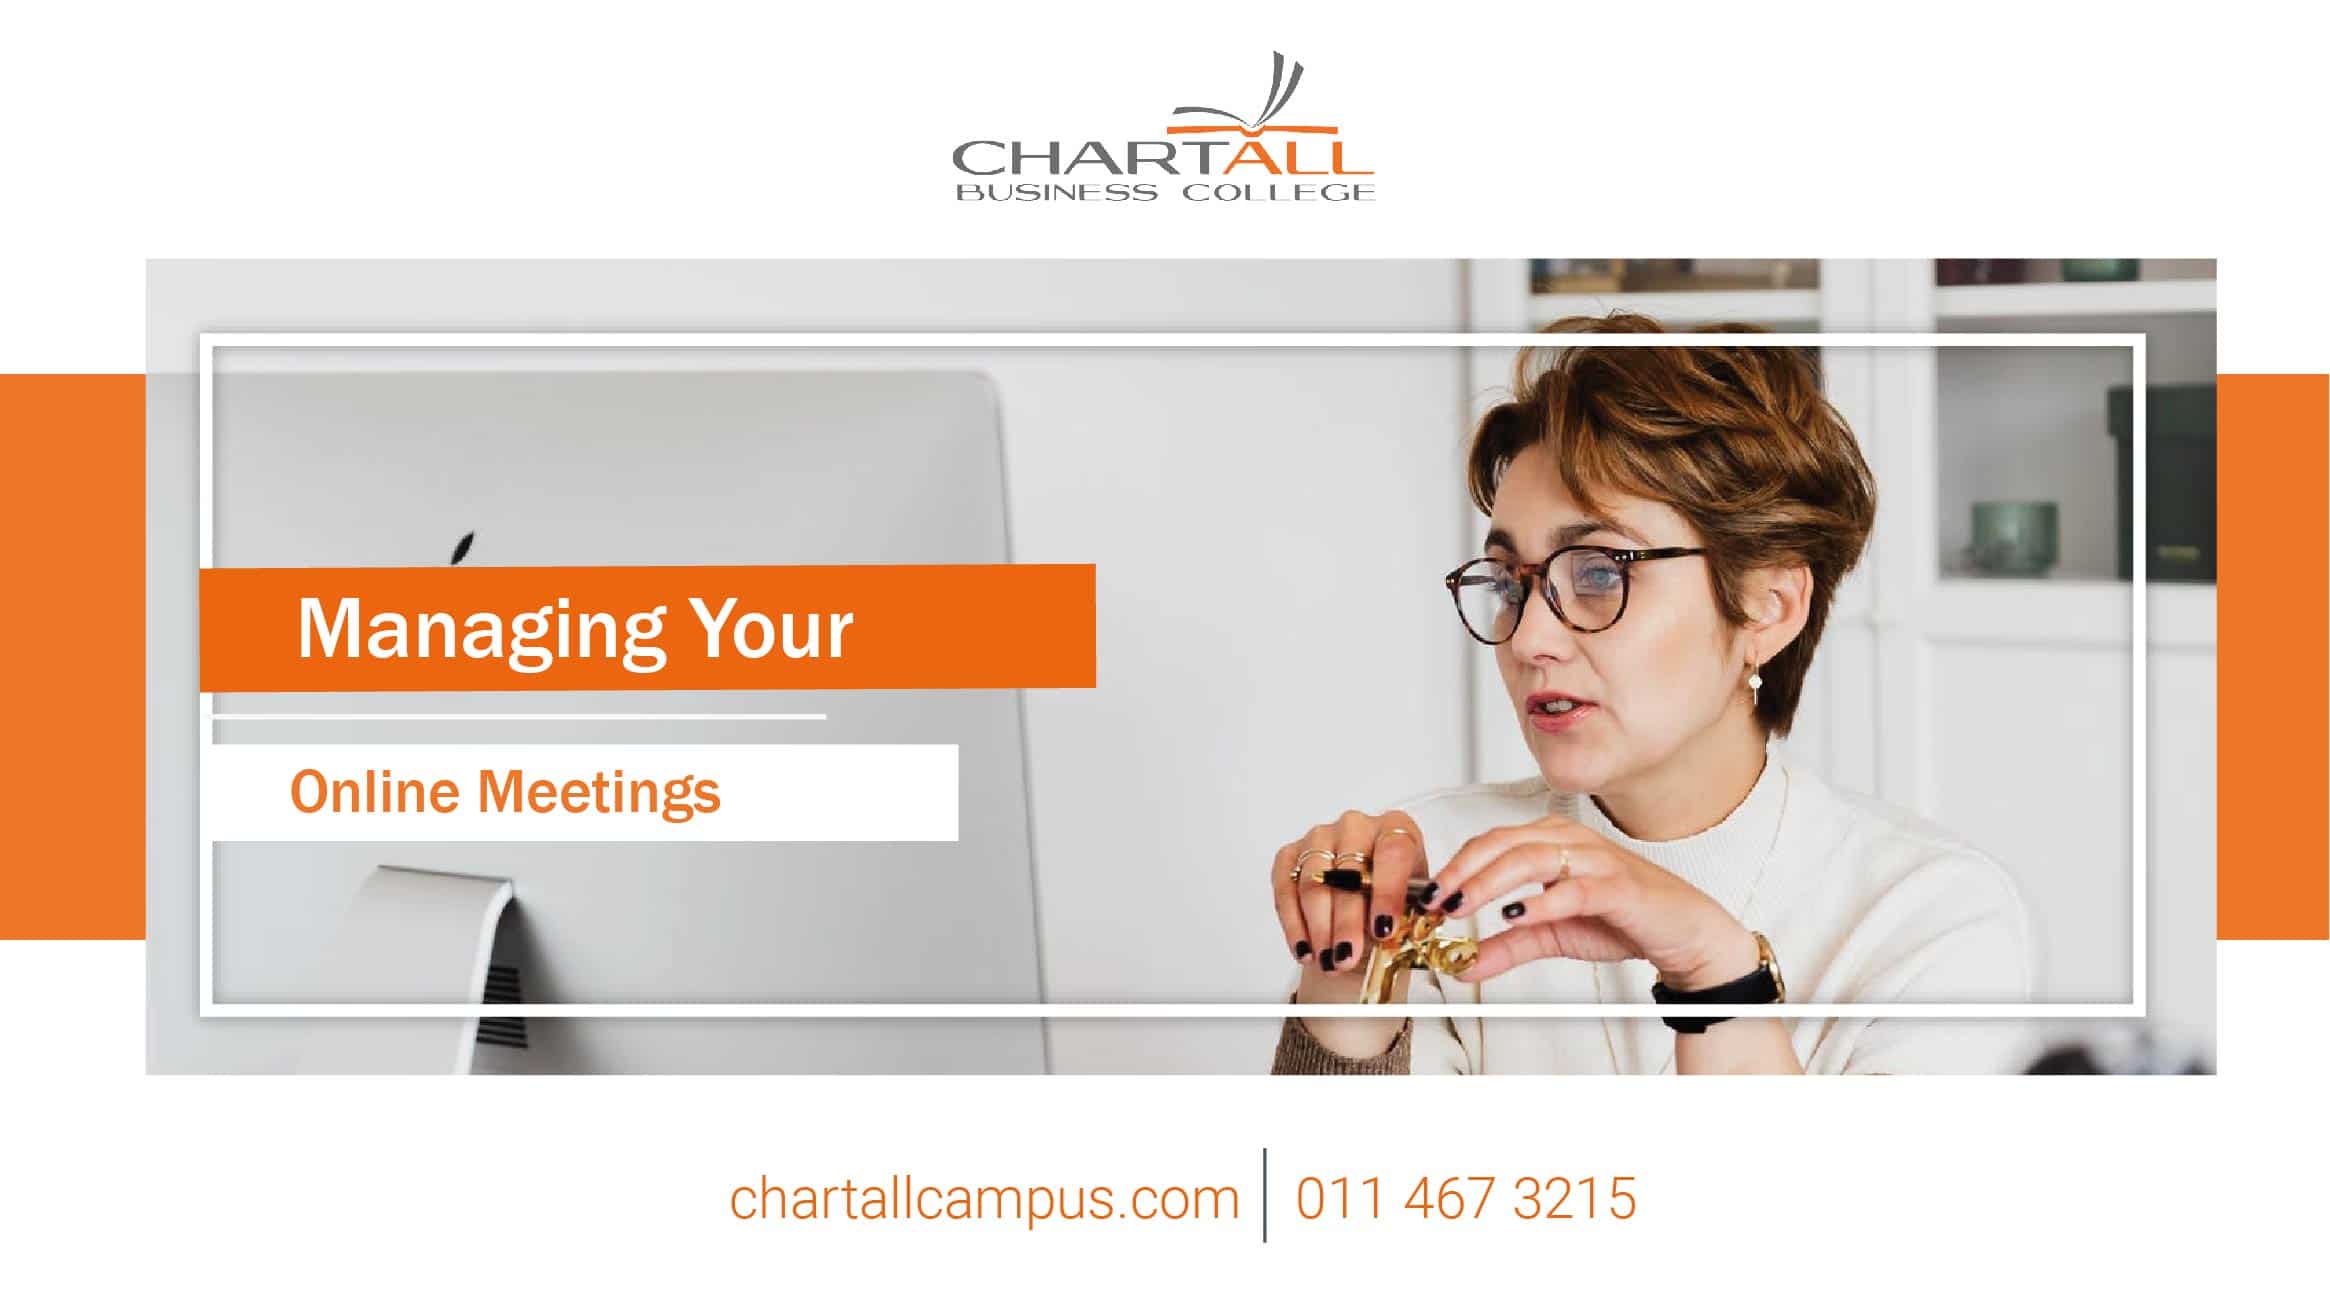 5 Tips to Effectively Manage Your Online Meetings